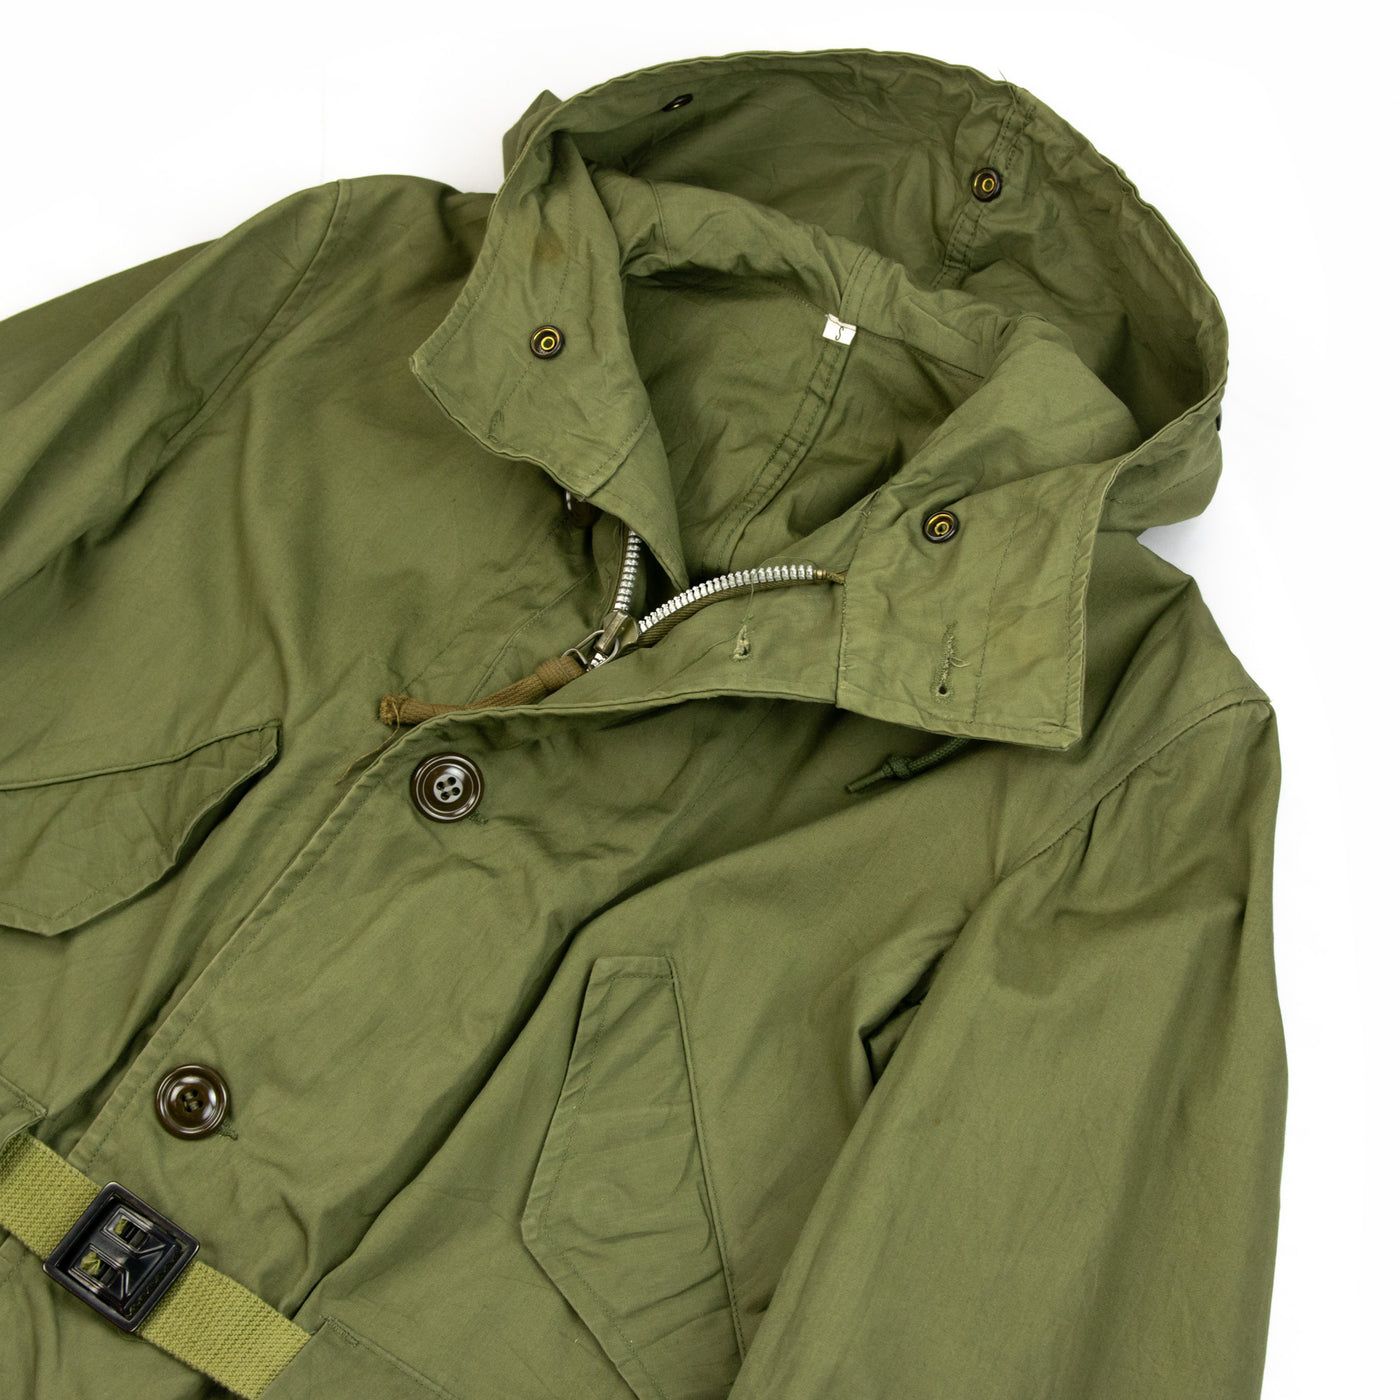 Vintage 1950s US Army Air Force Deadstock M-47 Military Parka Olive Green - S